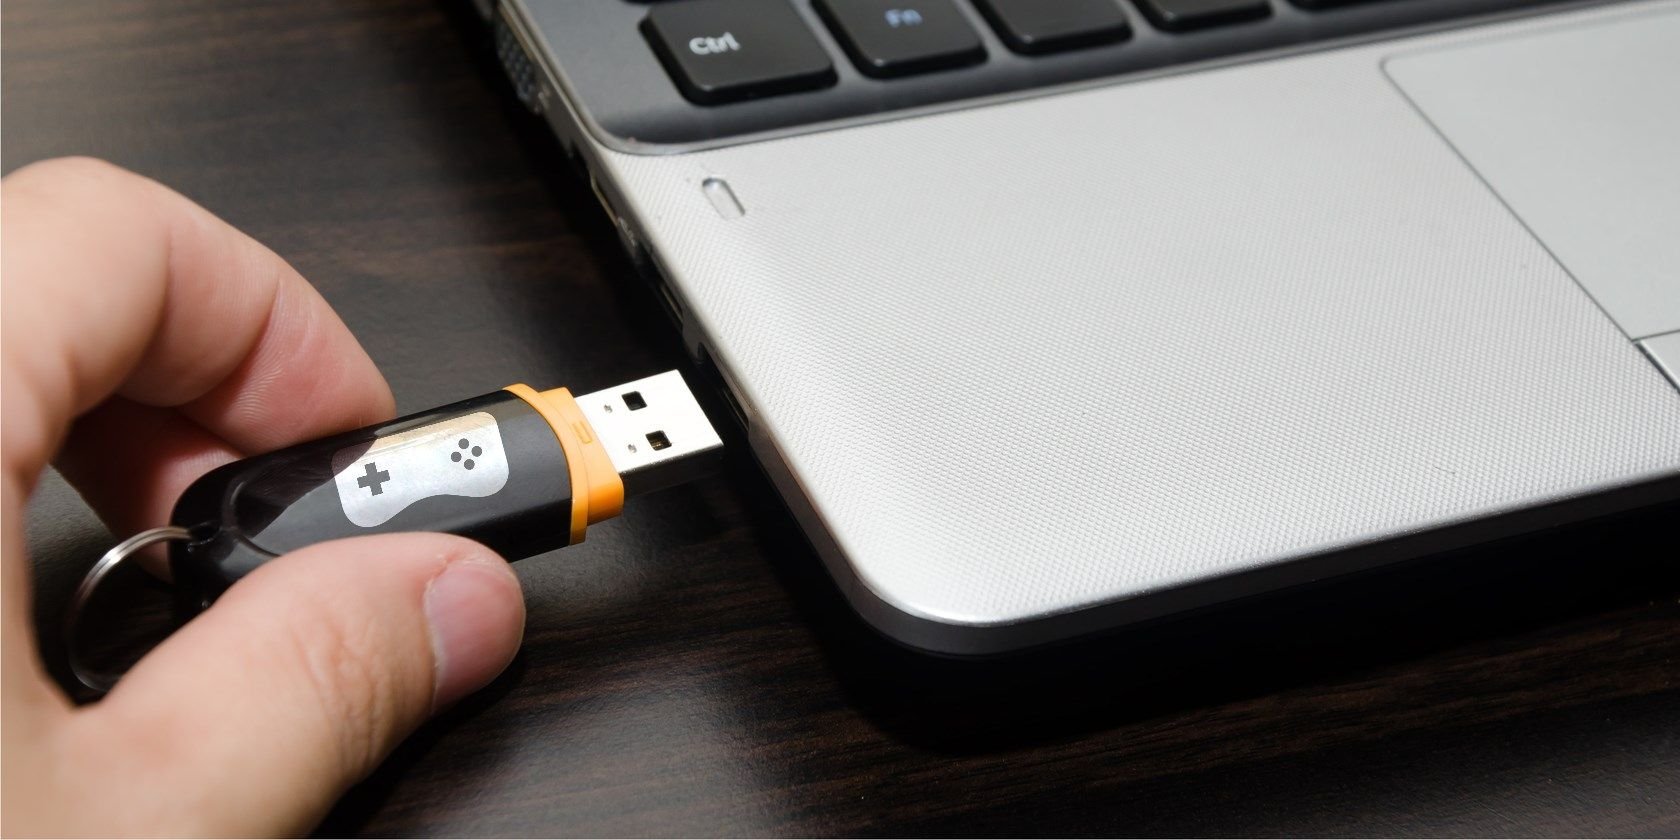 10 Practical Uses for a USB Flash Drive You Didn't Know About